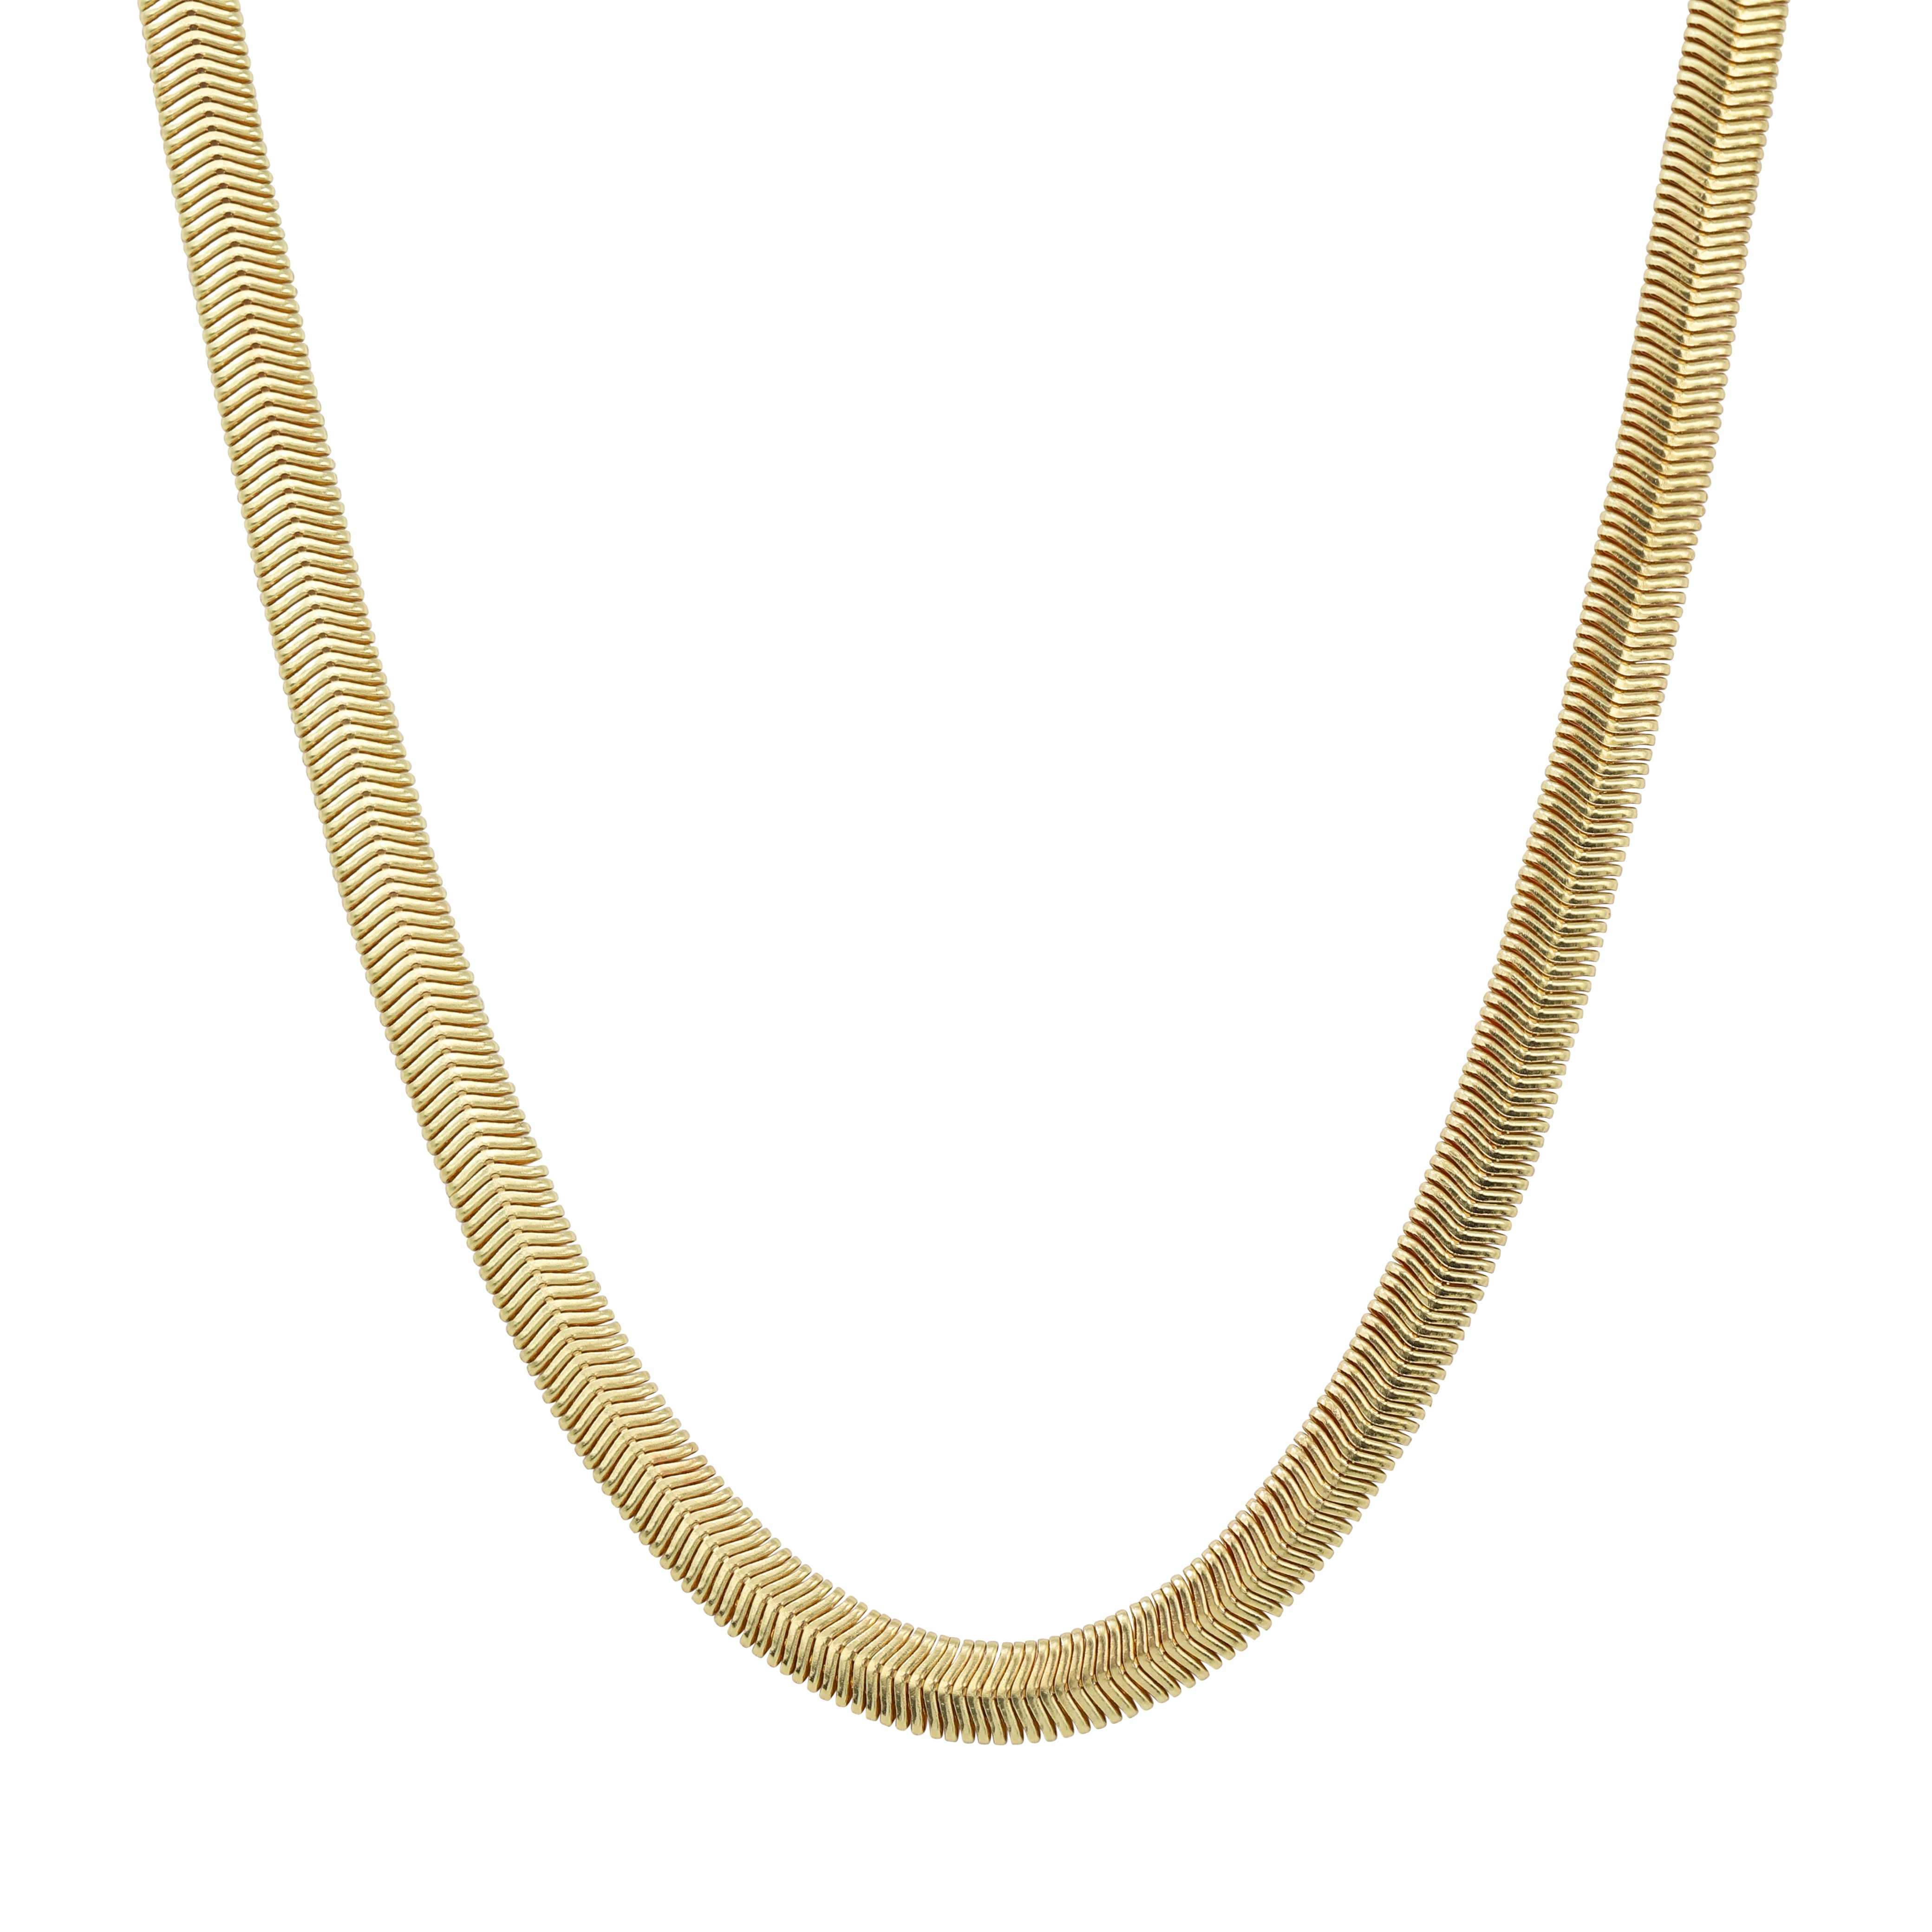 6MM FLAT COIL CHAIN GOLD